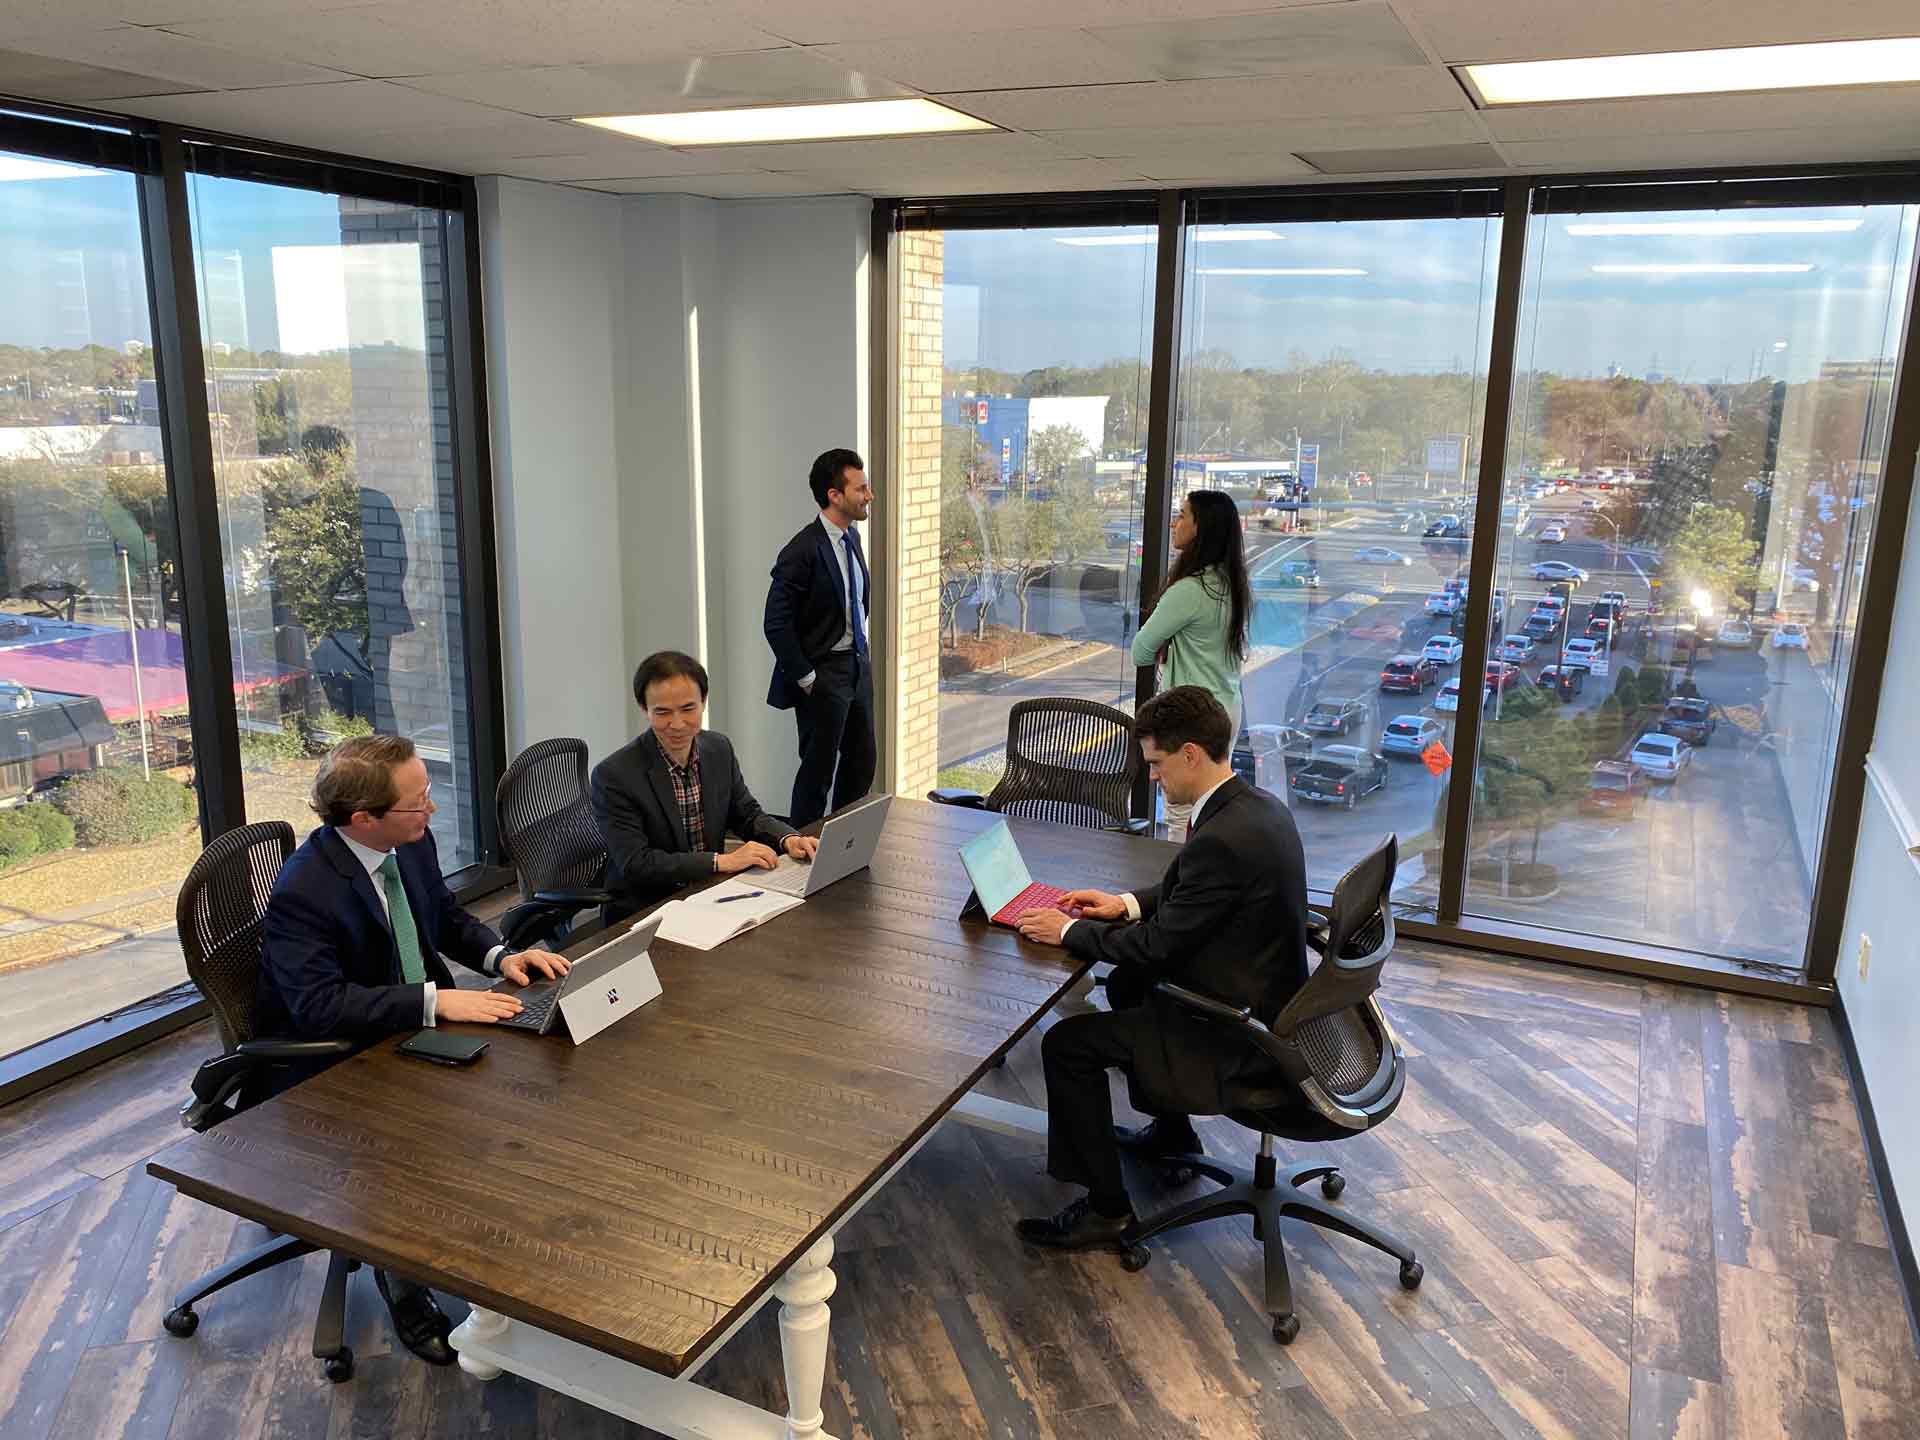 Houston meeting space with floor to ceiling windows. Conference room has table and chairs for 4.